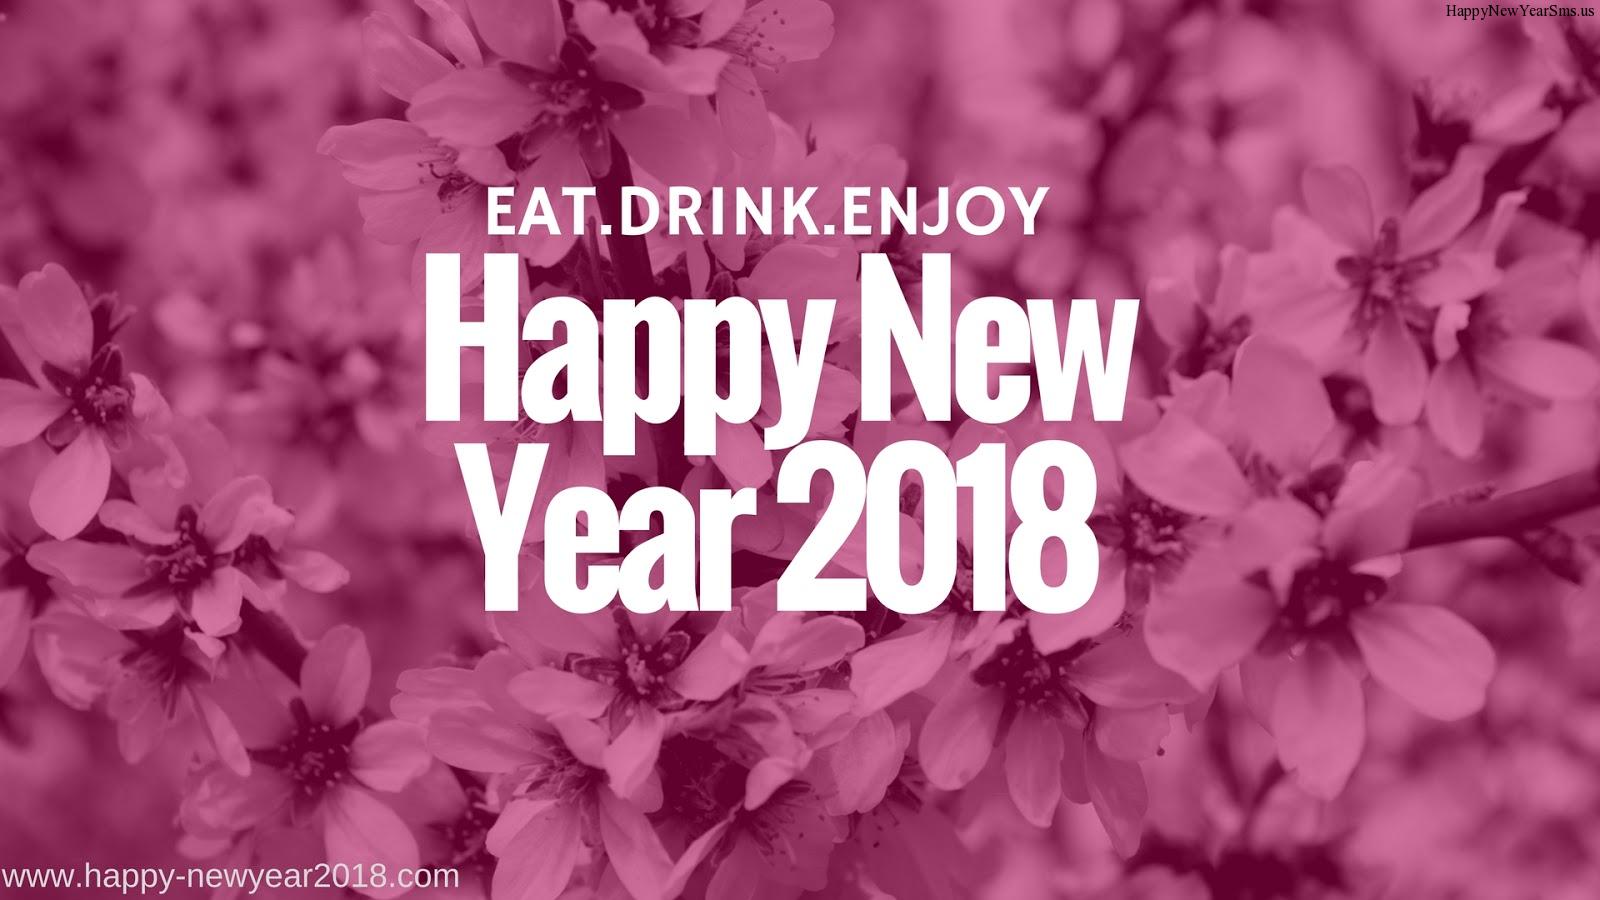 happy new year 2018 quotes. Happy New Year 2018